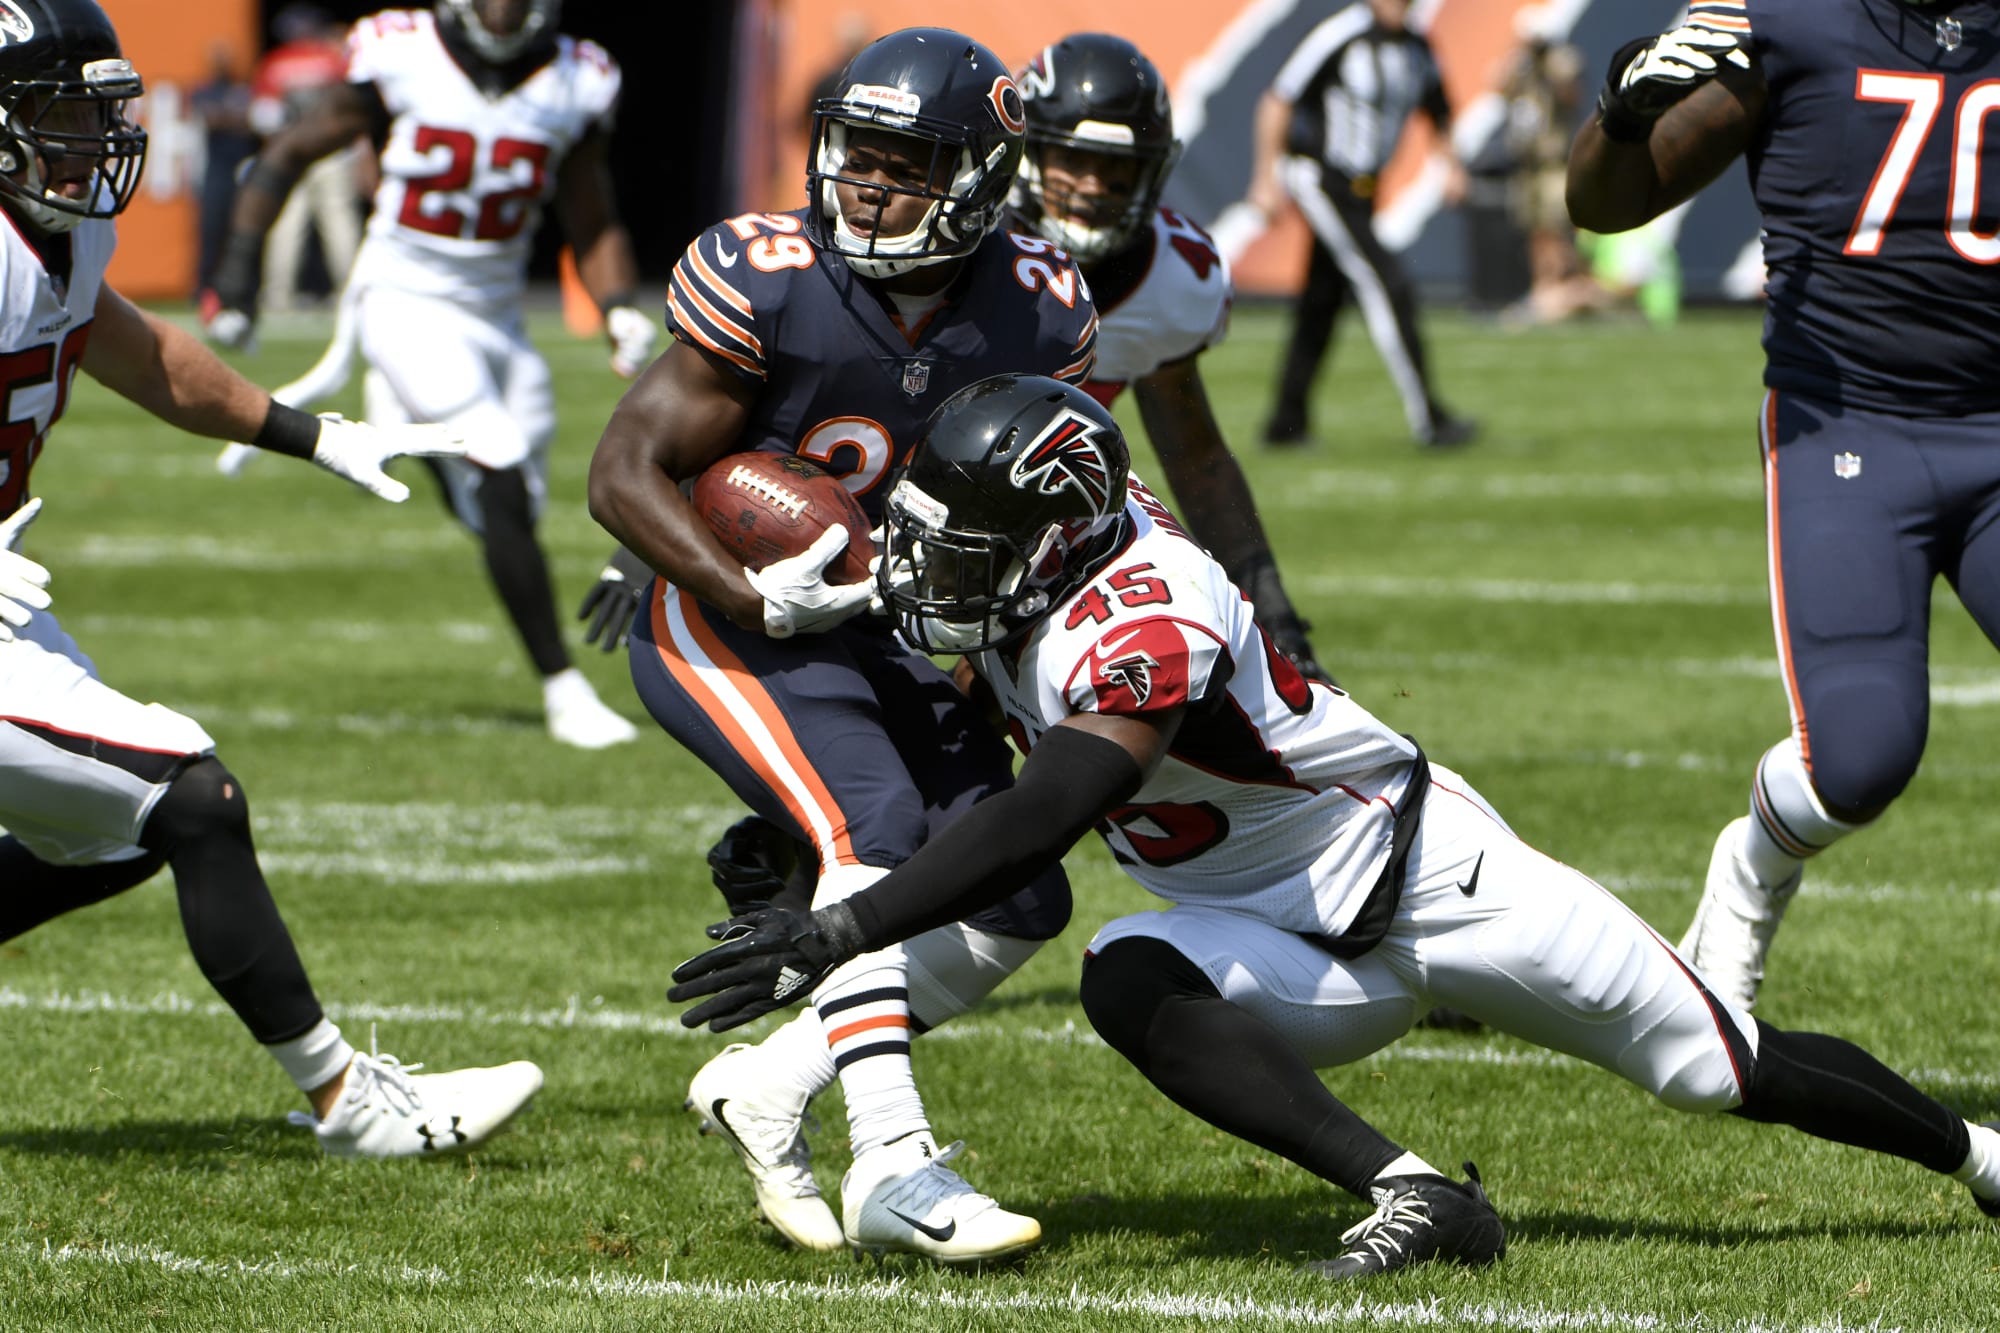 Chicago Bears vs. Tampa Bay Buccaneers: Five players to watch